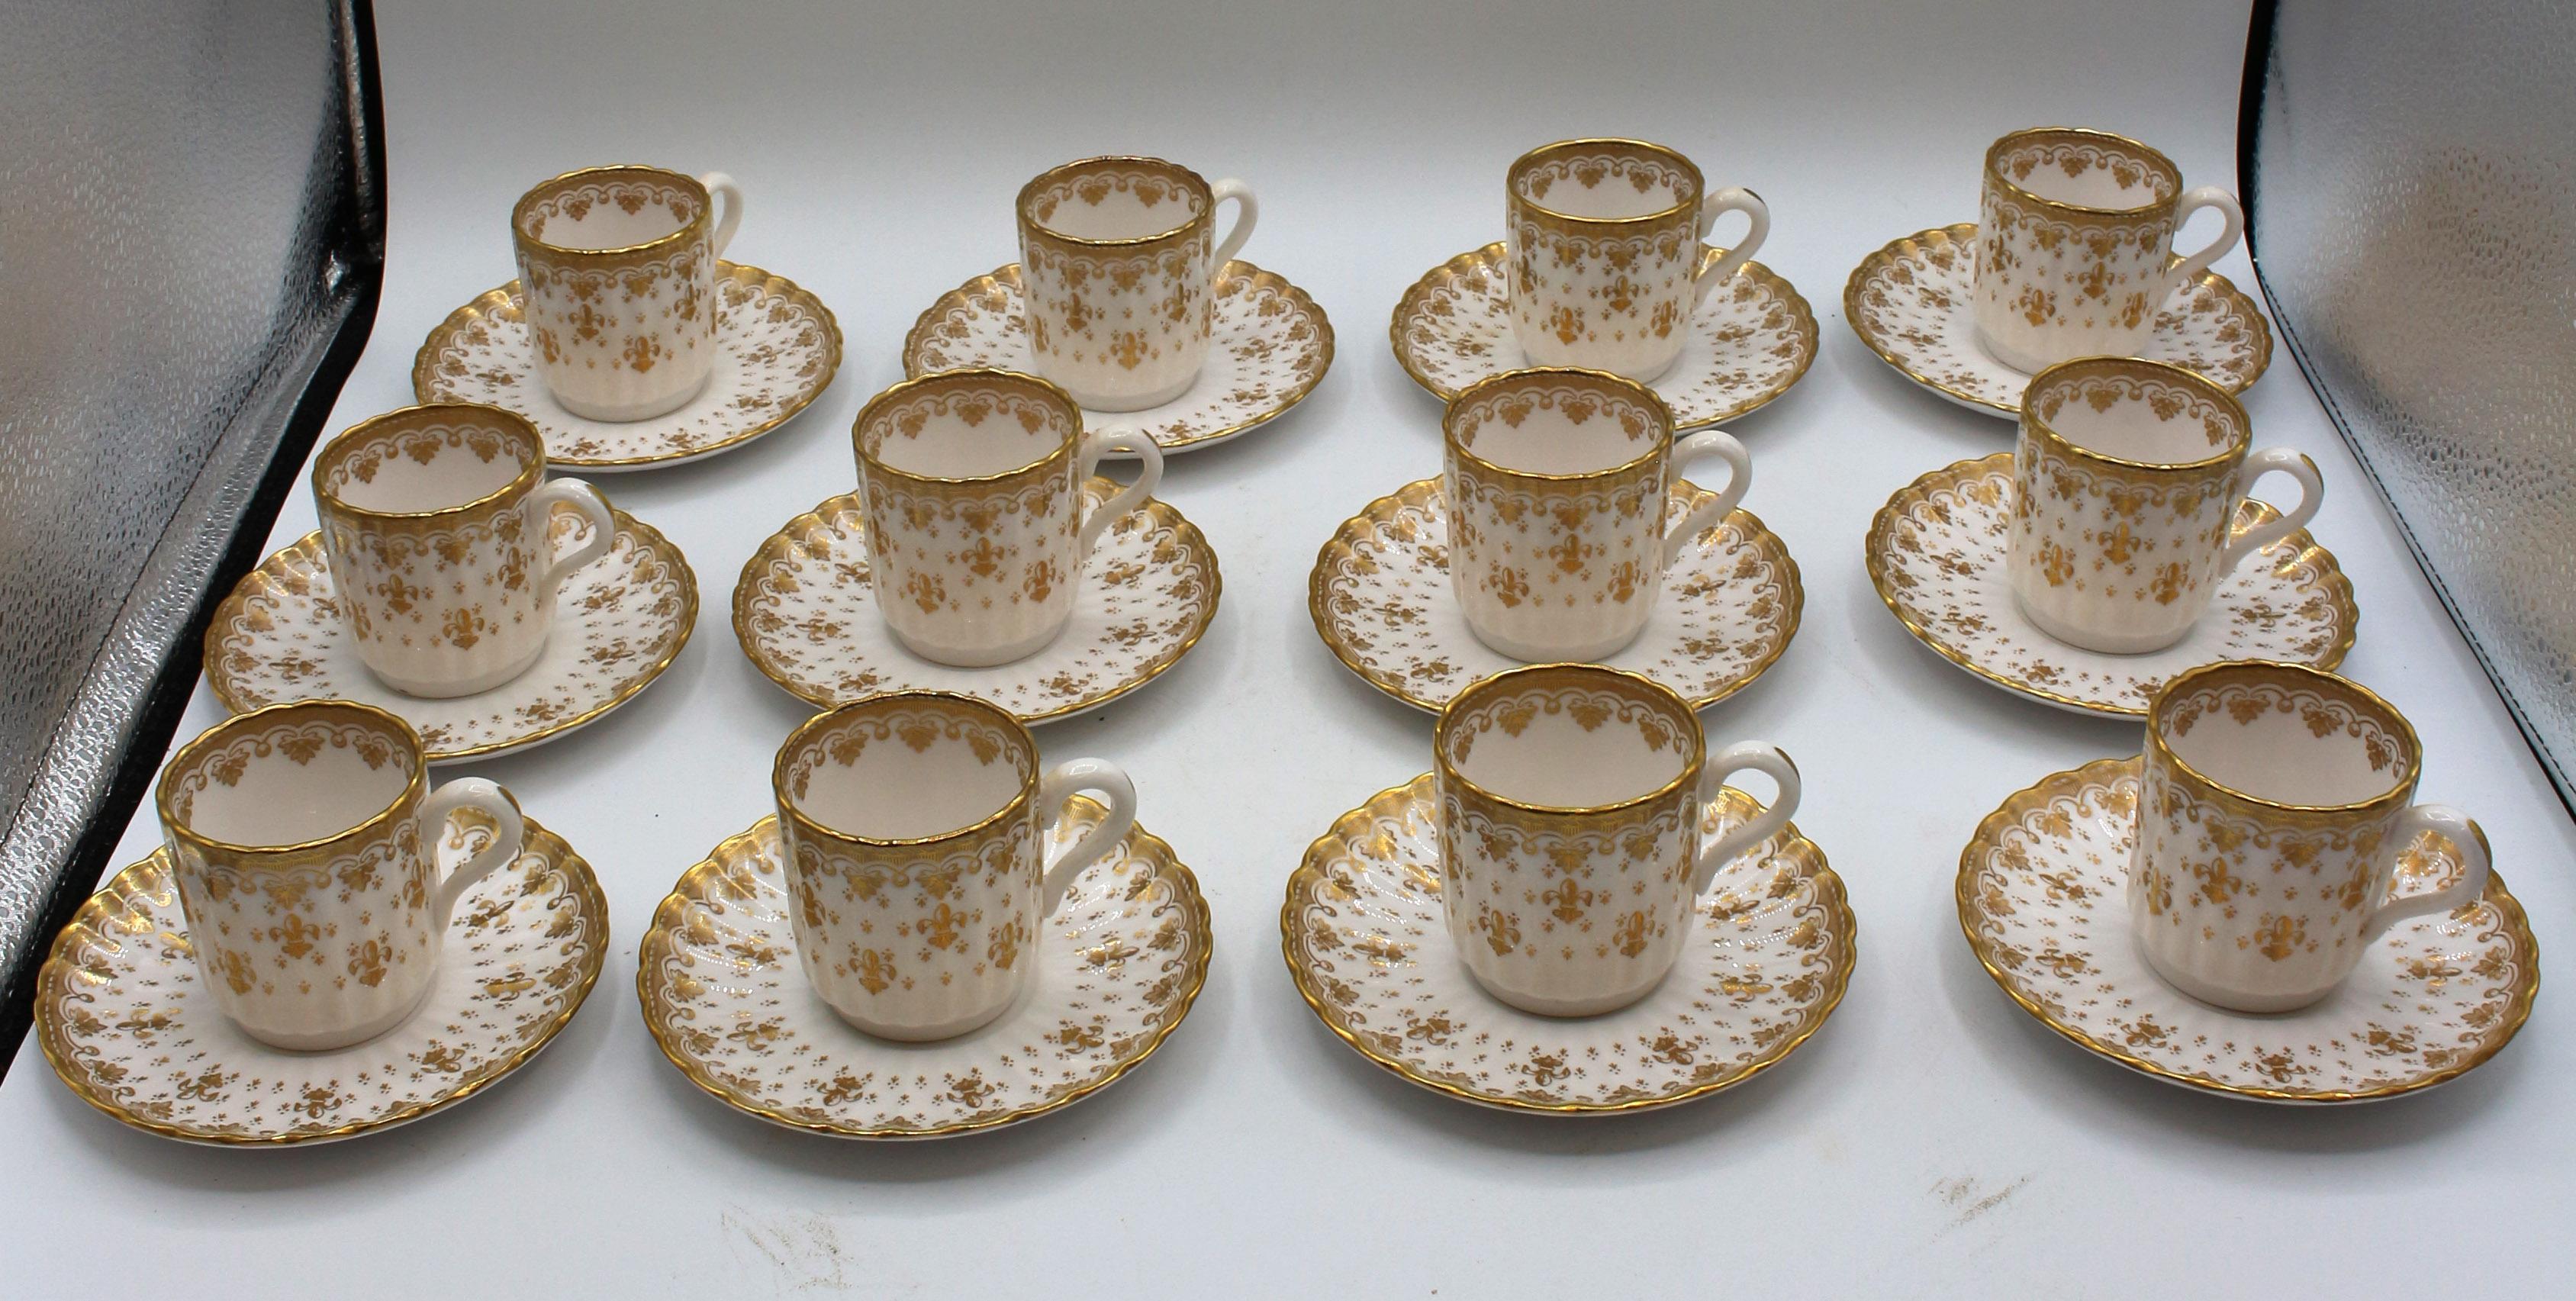 Demitasse Service for 12 with Large Pot & 12 Cups, Spode's Fleur de Lys Gold, Mid-20th century, bone china. Fine gilt decoration. Discontinued pattern. Fine condition.
Cup: 2 1/8